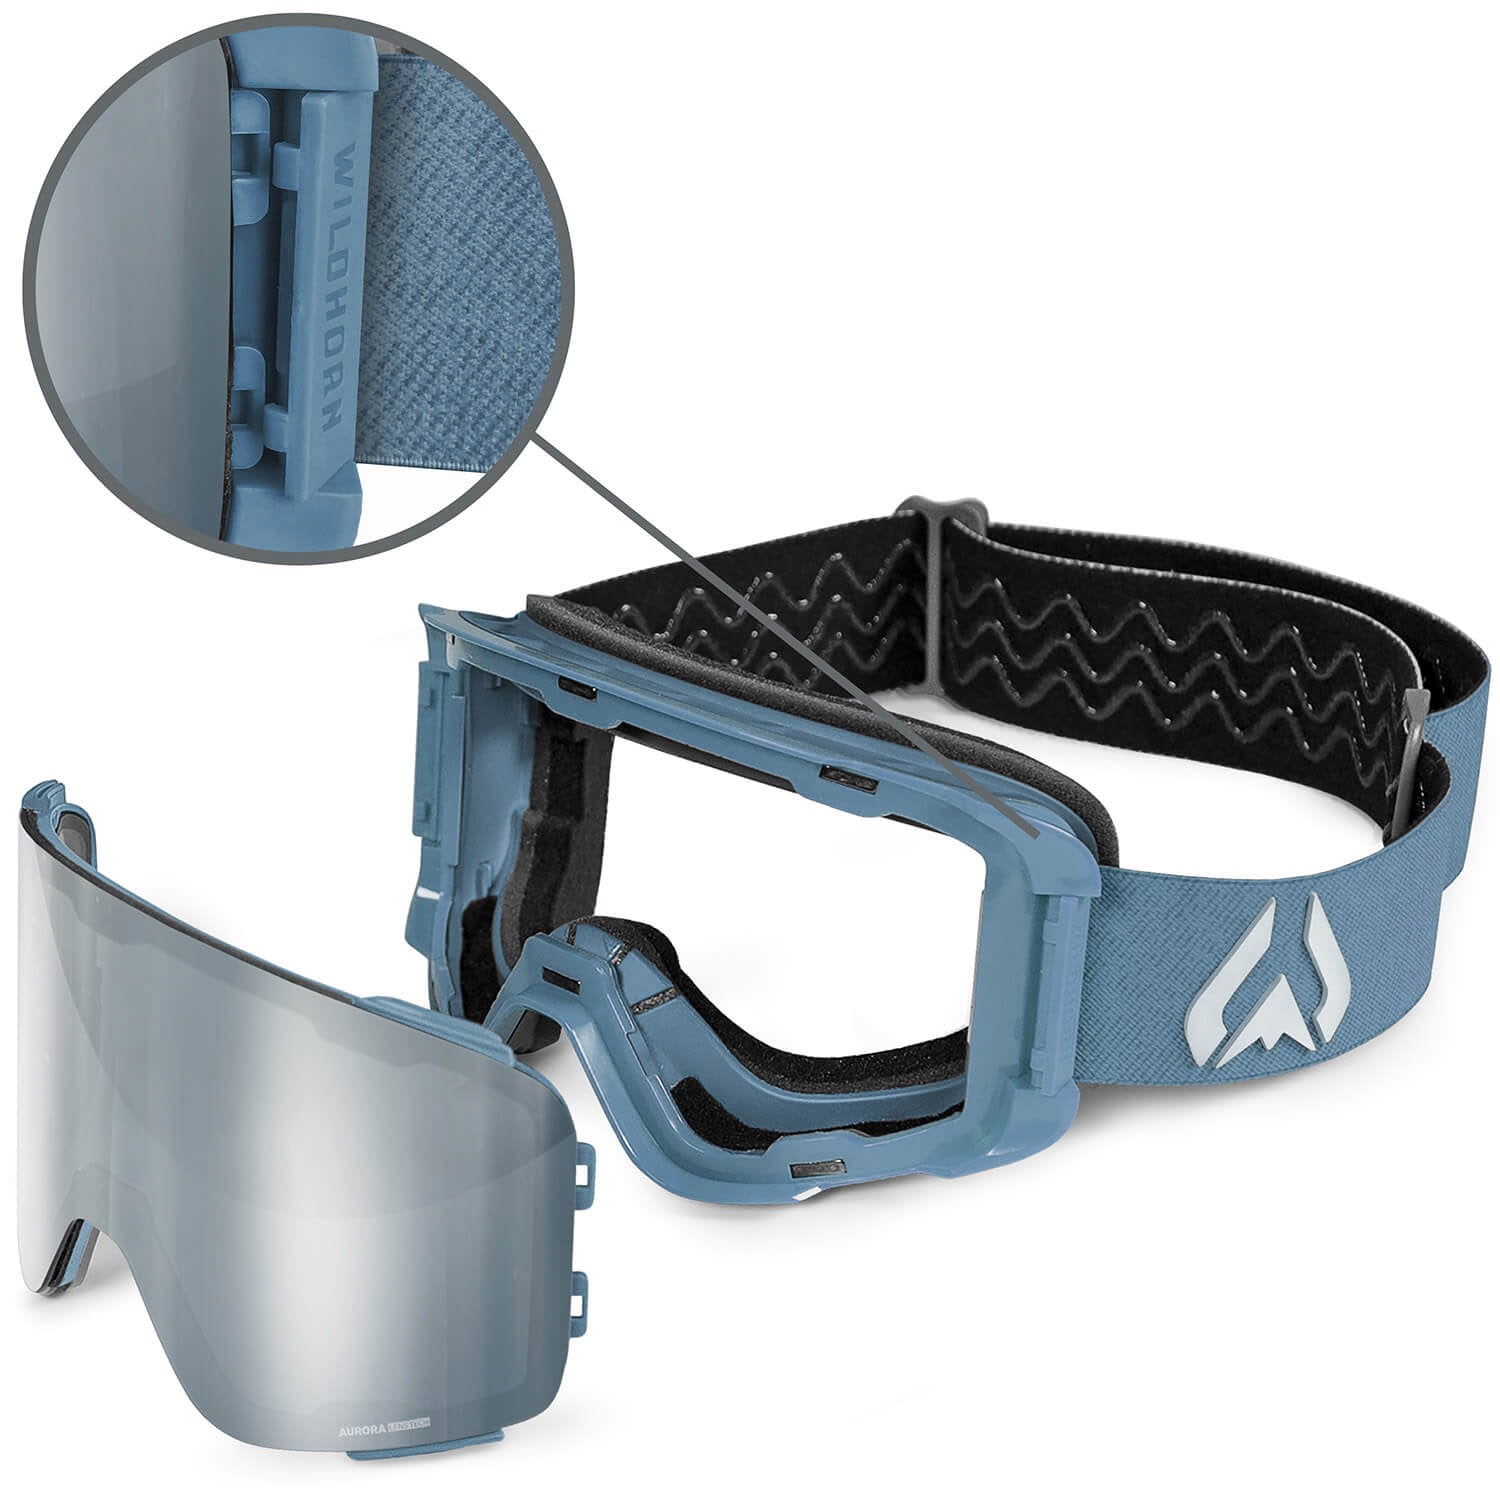 Pipeline Snow Goggles – Wildhorn Outfitters